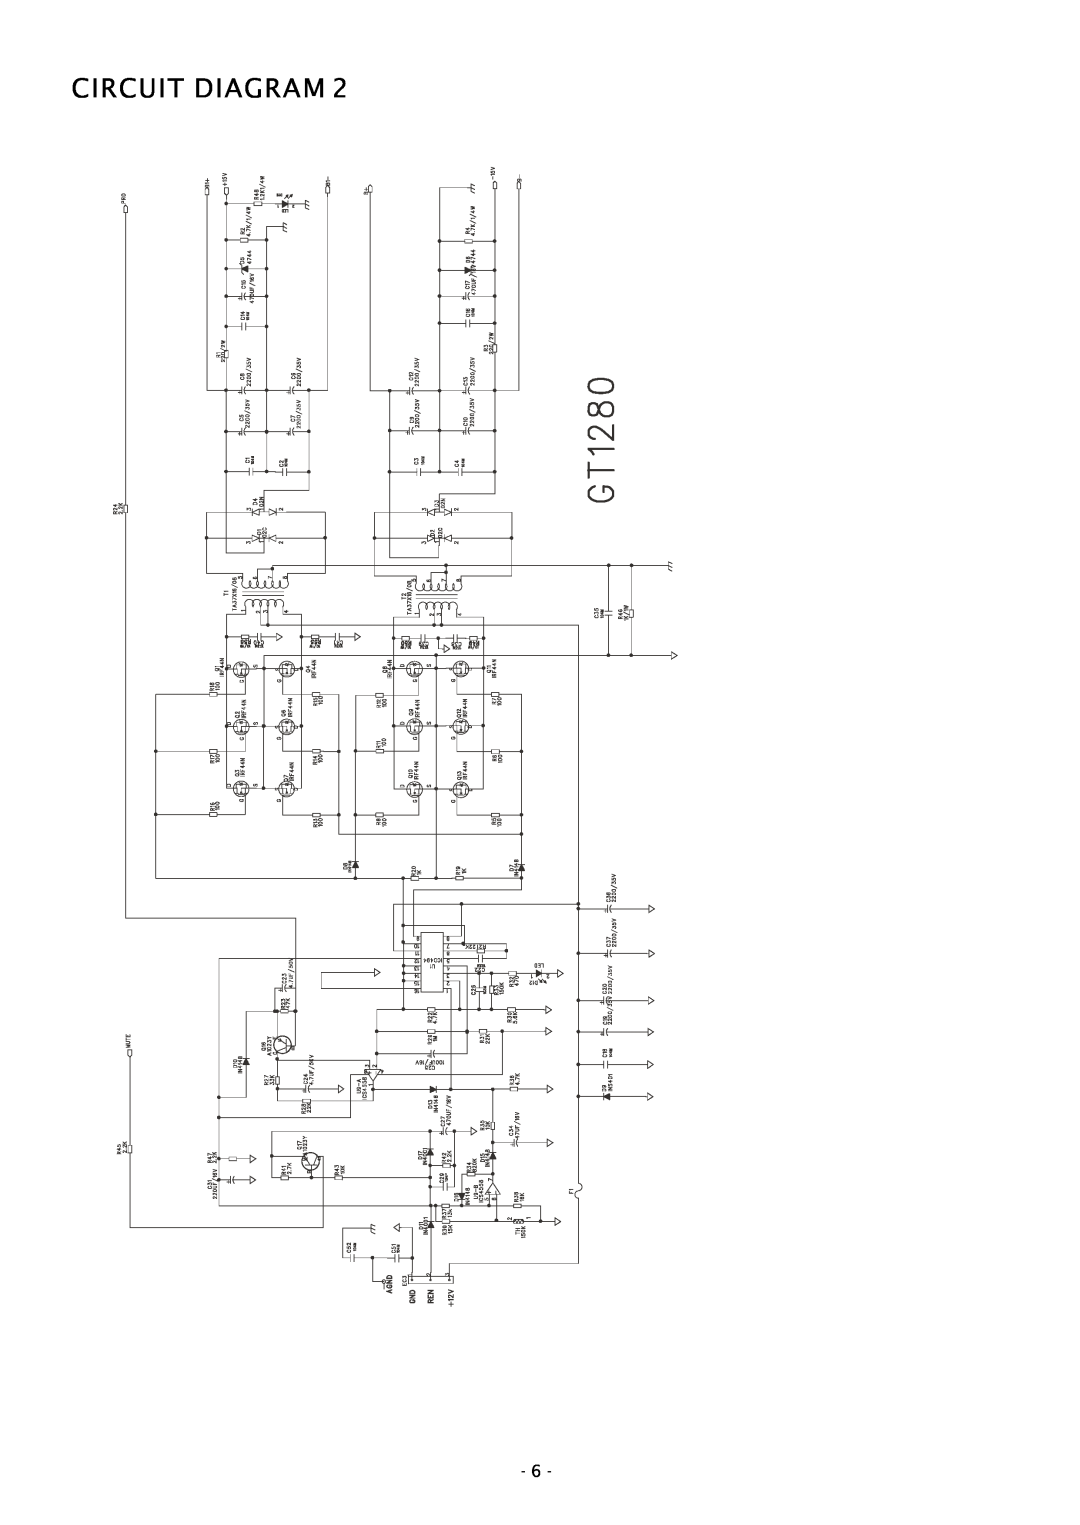 Boss Audio Systems GT1280 service manual Circuit Diagram 